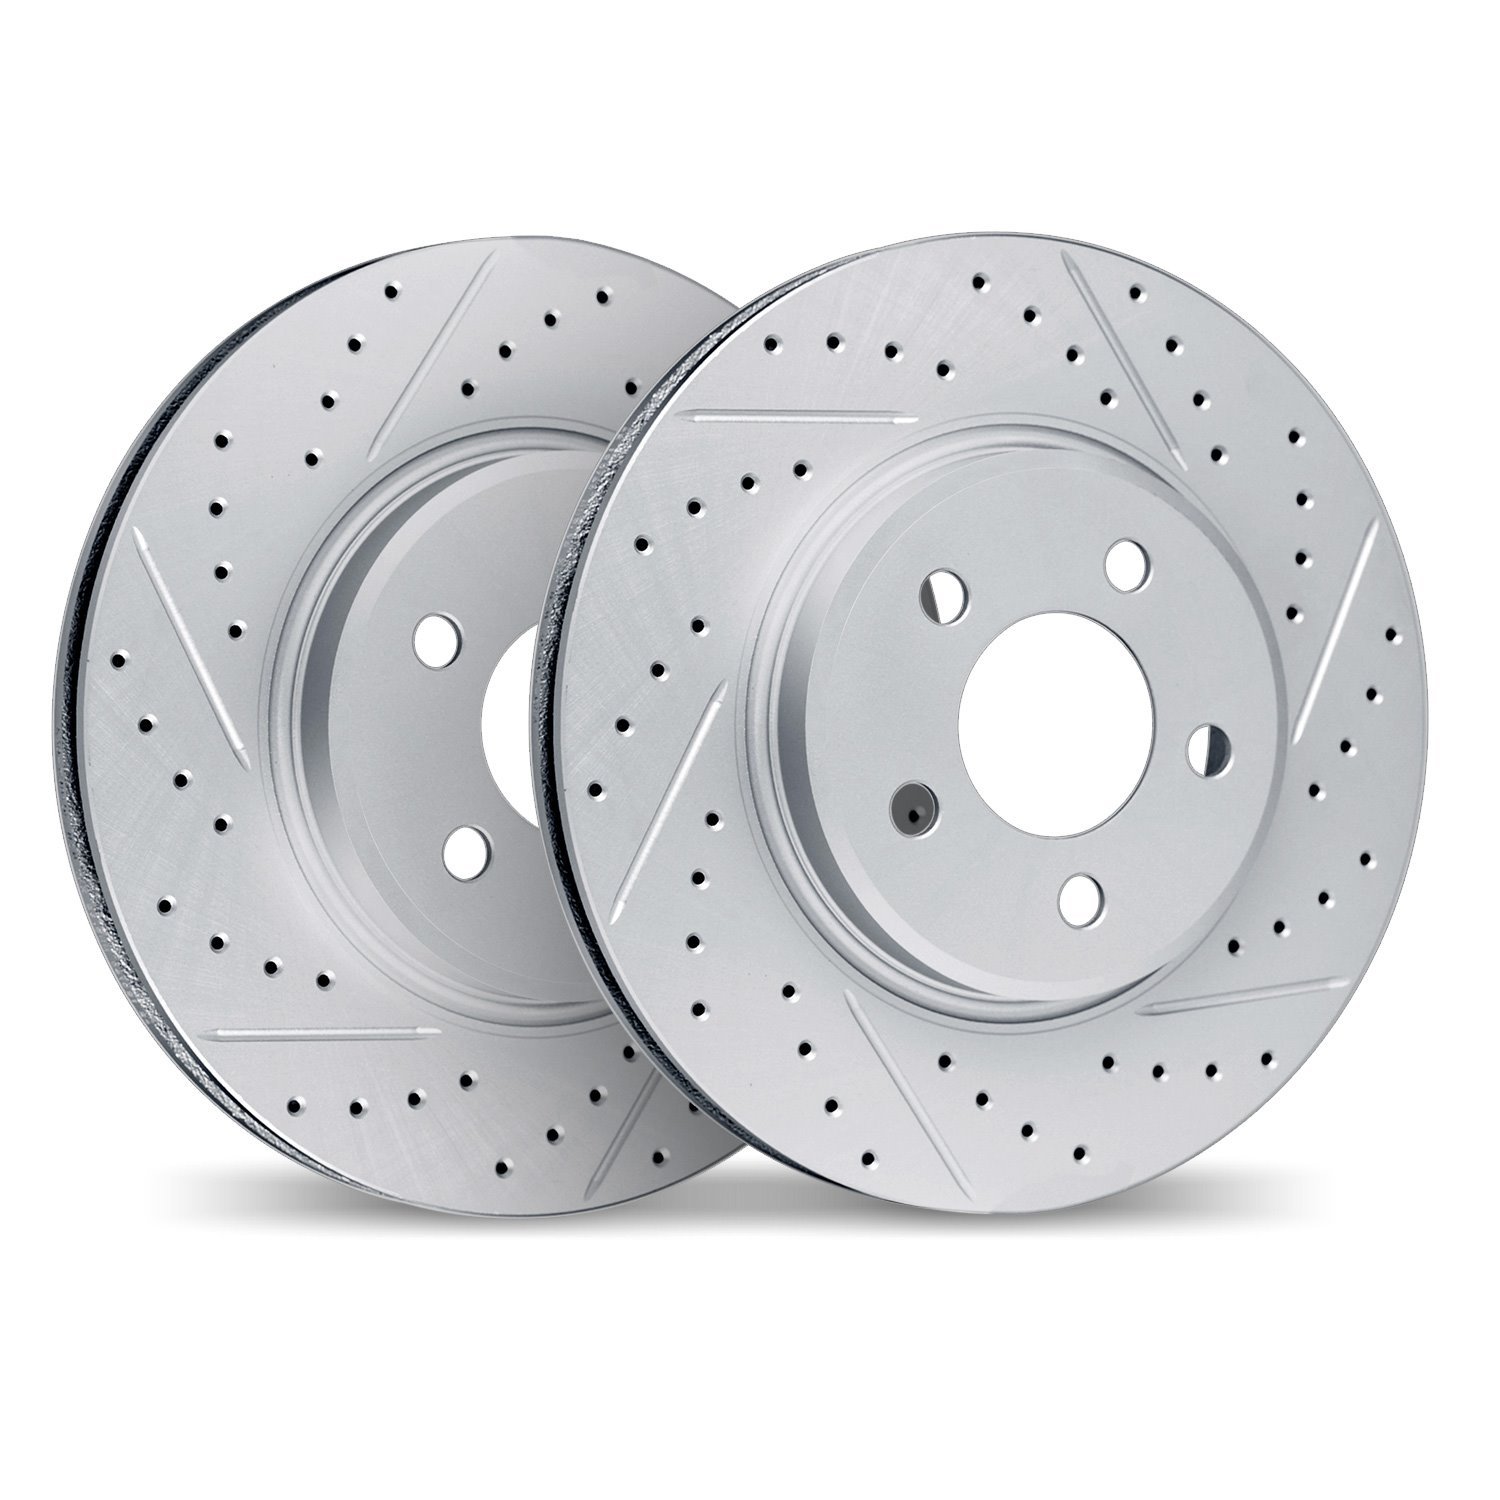 2002-76202 Geoperformance Drilled/Slotted Brake Rotors, Fits Select Lexus/Toyota/Scion, Position: Rear